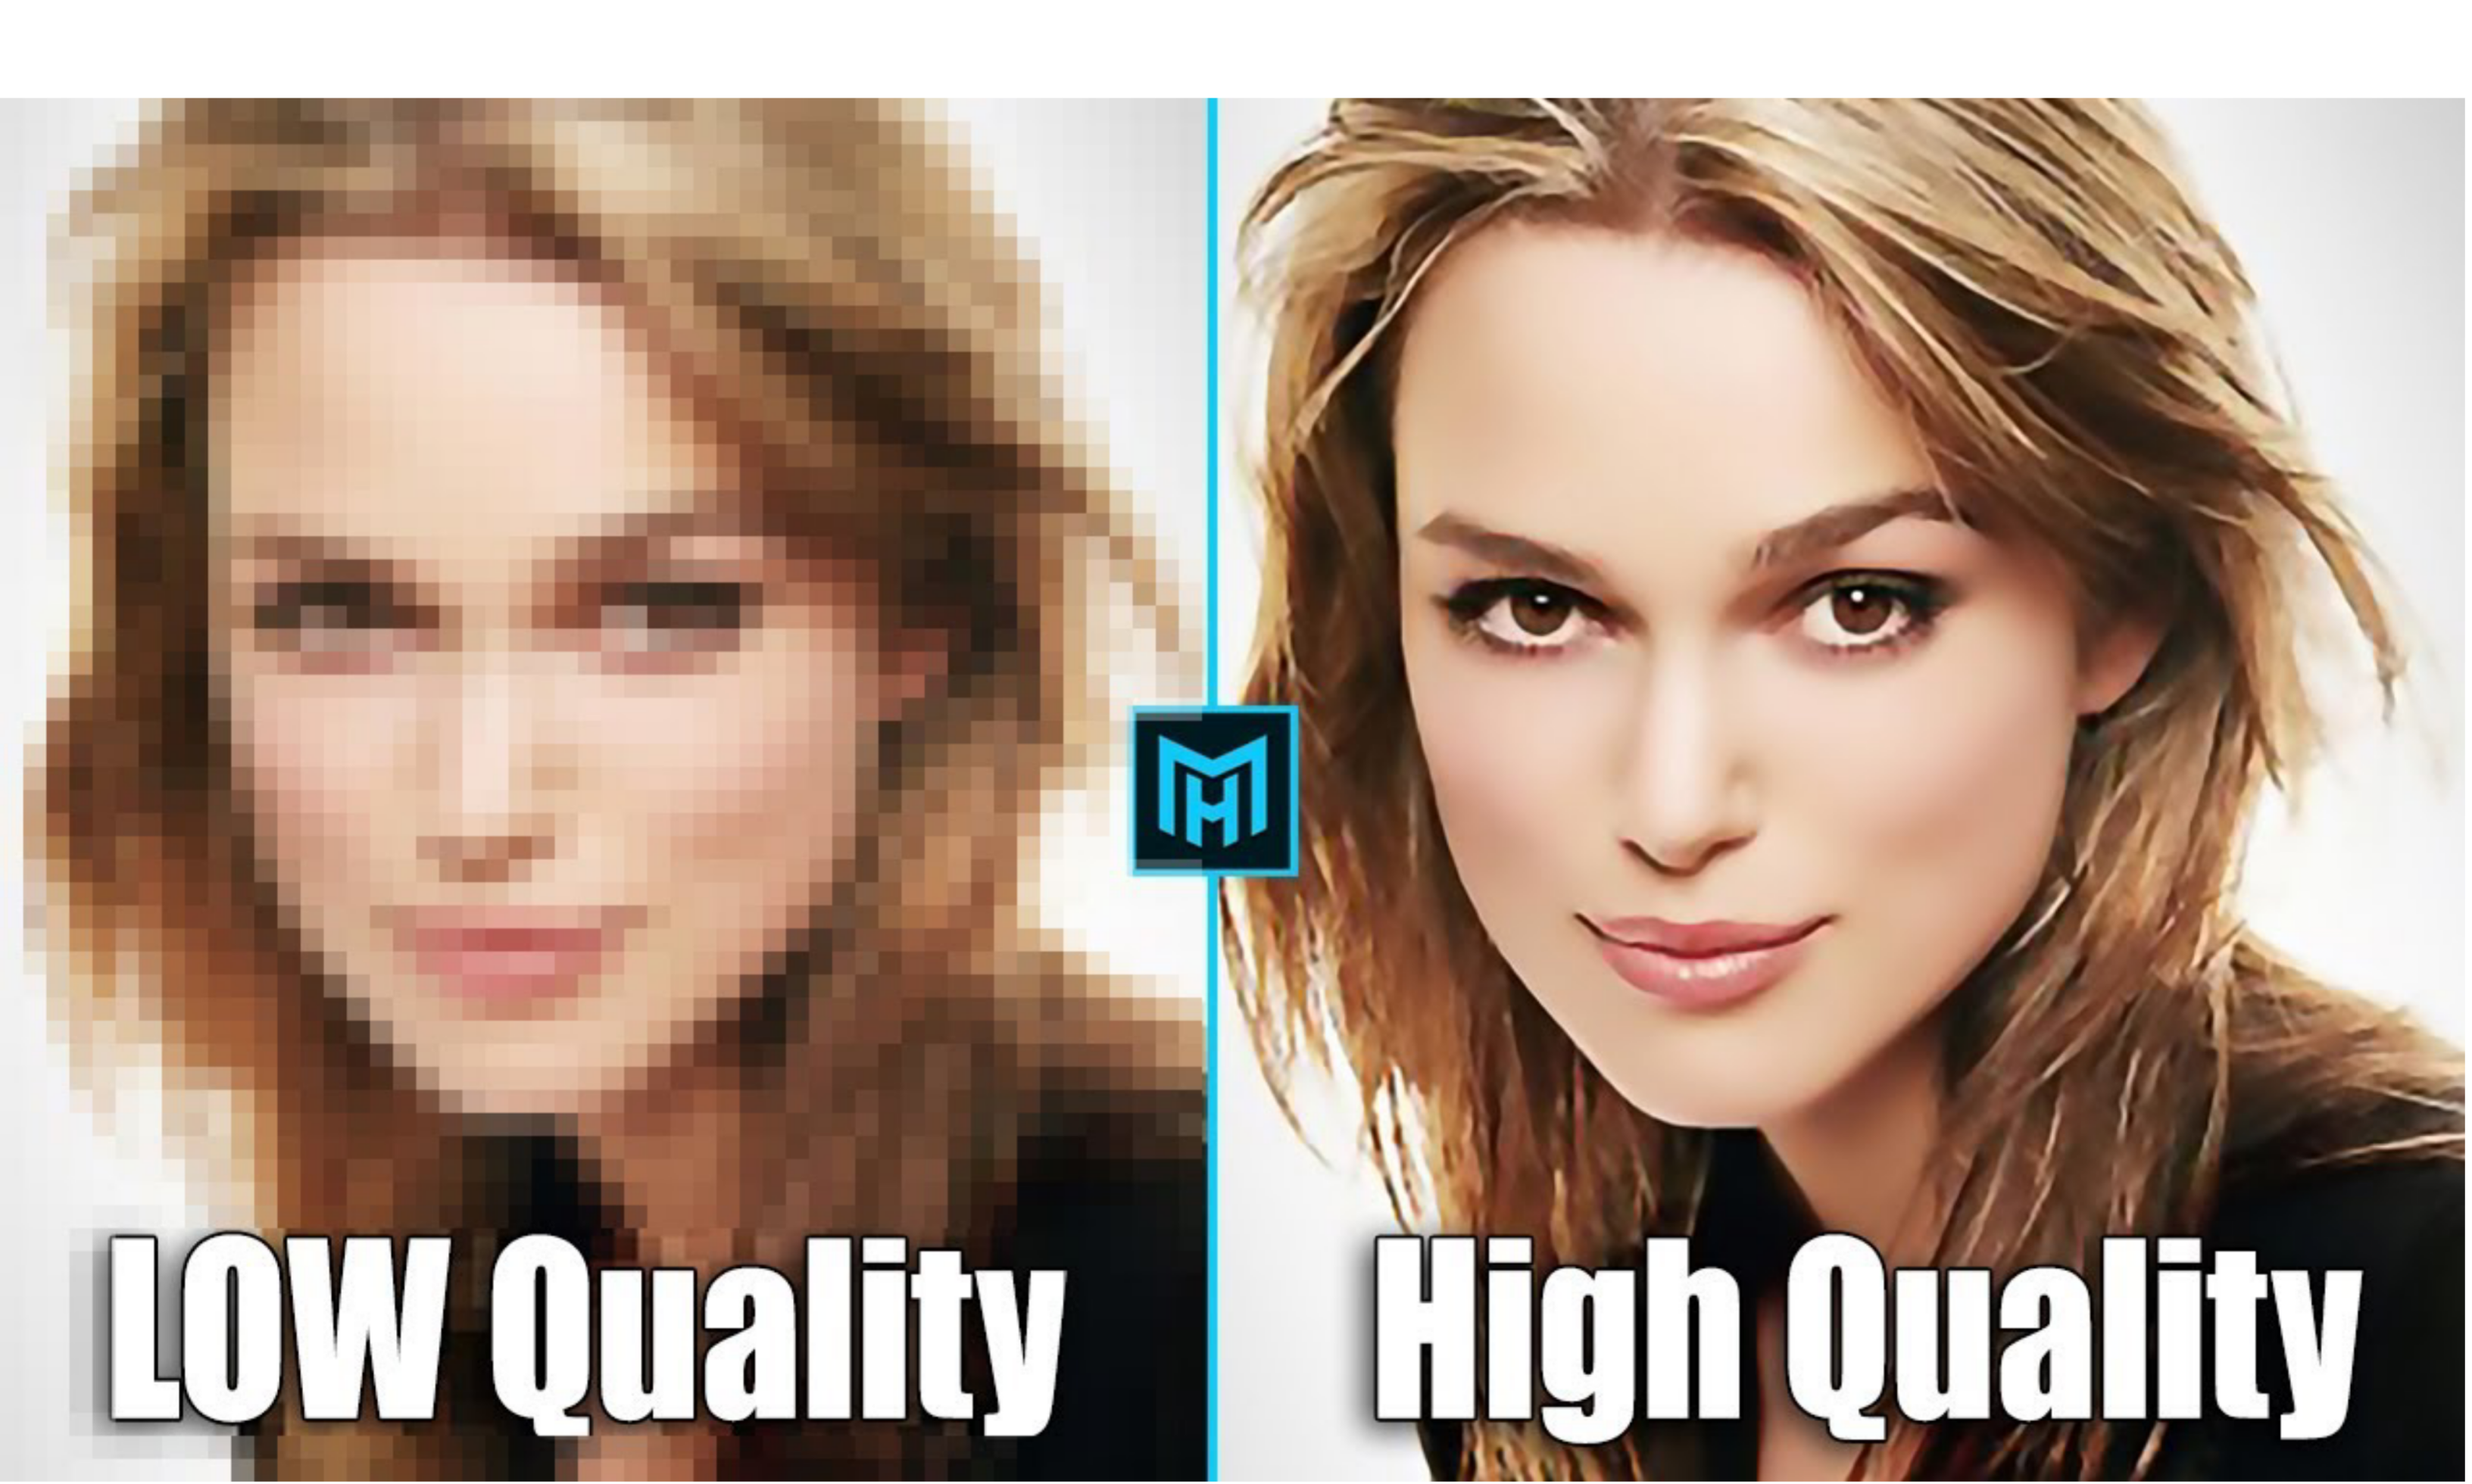 Enhance,improve and upscale your low quality images and photos